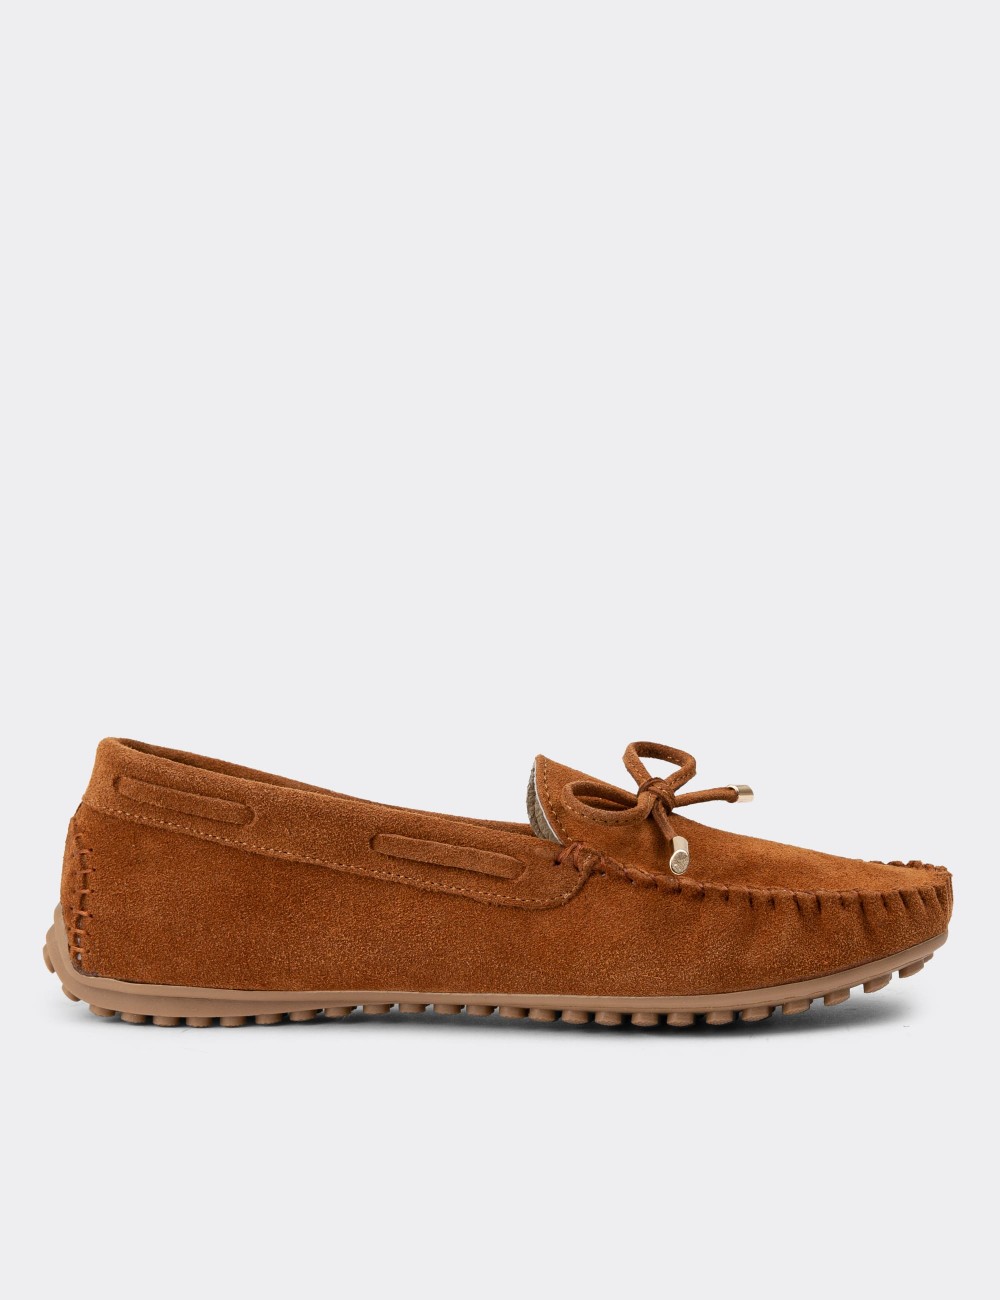 Tan Suede Leather Loafers - SW101ZTBAC03